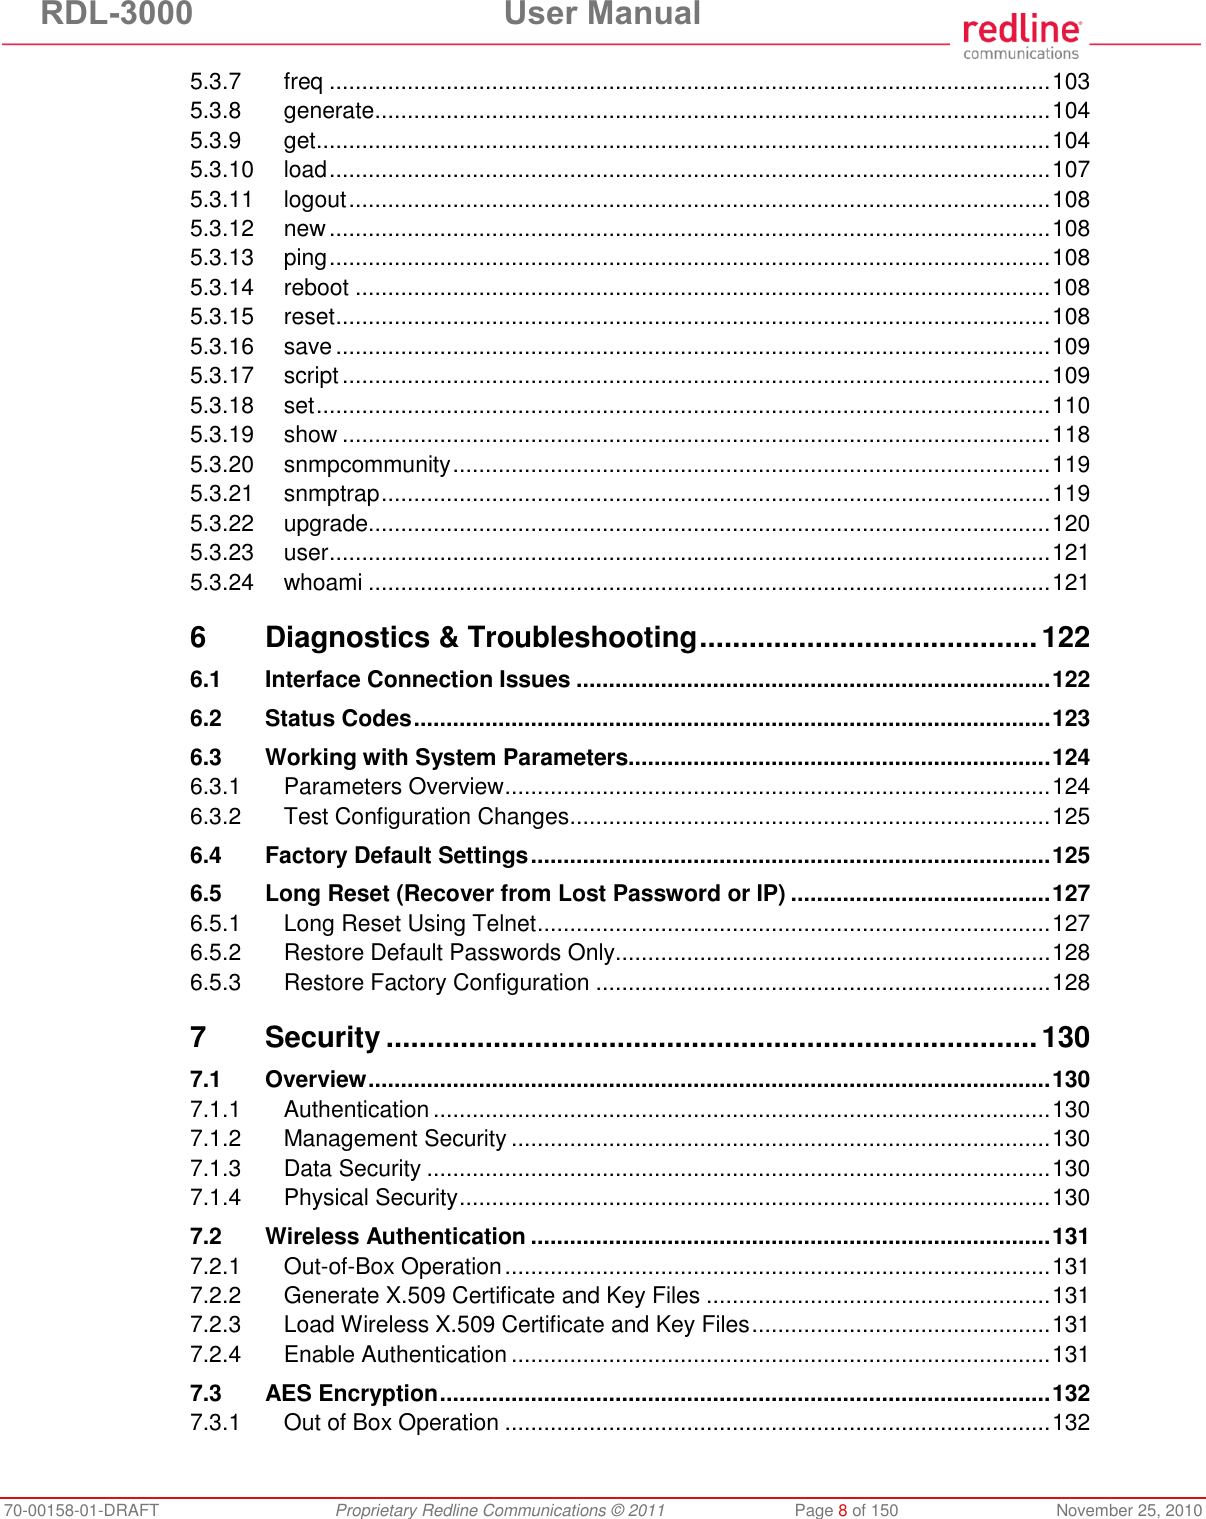 RDL-3000  User Manual 70-00158-01-DRAFT  Proprietary Redline Communications © 2011  Page 8 of 150  November 25, 2010 5.3.7 freq ............................................................................................................... 103 5.3.8 generate ........................................................................................................ 104 5.3.9 get ................................................................................................................. 104 5.3.10 load ............................................................................................................... 107 5.3.11 logout ............................................................................................................ 108 5.3.12 new ............................................................................................................... 108 5.3.13 ping ............................................................................................................... 108 5.3.14 reboot ........................................................................................................... 108 5.3.15 reset .............................................................................................................. 108 5.3.16 save .............................................................................................................. 109 5.3.17 script ............................................................................................................. 109 5.3.18 set ................................................................................................................. 110 5.3.19 show ............................................................................................................. 118 5.3.20 snmpcommunity ............................................................................................ 119 5.3.21 snmptrap ....................................................................................................... 119 5.3.22 upgrade ......................................................................................................... 120 5.3.23 user ............................................................................................................... 121 5.3.24 whoami ......................................................................................................... 121 6 Diagnostics &amp; Troubleshooting ......................................... 122 6.1 Interface Connection Issues ......................................................................... 122 6.2 Status Codes .................................................................................................. 123 6.3 Working with System Parameters................................................................. 124 6.3.1 Parameters Overview .................................................................................... 124 6.3.2 Test Configuration Changes .......................................................................... 125 6.4 Factory Default Settings ................................................................................ 125 6.5 Long Reset (Recover from Lost Password or IP) ........................................ 127 6.5.1 Long Reset Using Telnet ............................................................................... 127 6.5.2 Restore Default Passwords Only................................................................... 128 6.5.3 Restore Factory Configuration ...................................................................... 128 7 Security ............................................................................... 130 7.1 Overview ......................................................................................................... 130 7.1.1 Authentication ............................................................................................... 130 7.1.2 Management Security ................................................................................... 130 7.1.3 Data Security ................................................................................................ 130 7.1.4 Physical Security ........................................................................................... 130 7.2 Wireless Authentication ................................................................................ 131 7.2.1 Out-of-Box Operation .................................................................................... 131 7.2.2 Generate X.509 Certificate and Key Files ..................................................... 131 7.2.3 Load Wireless X.509 Certificate and Key Files .............................................. 131 7.2.4 Enable Authentication ................................................................................... 131 7.3 AES Encryption .............................................................................................. 132 7.3.1 Out of Box Operation .................................................................................... 132 